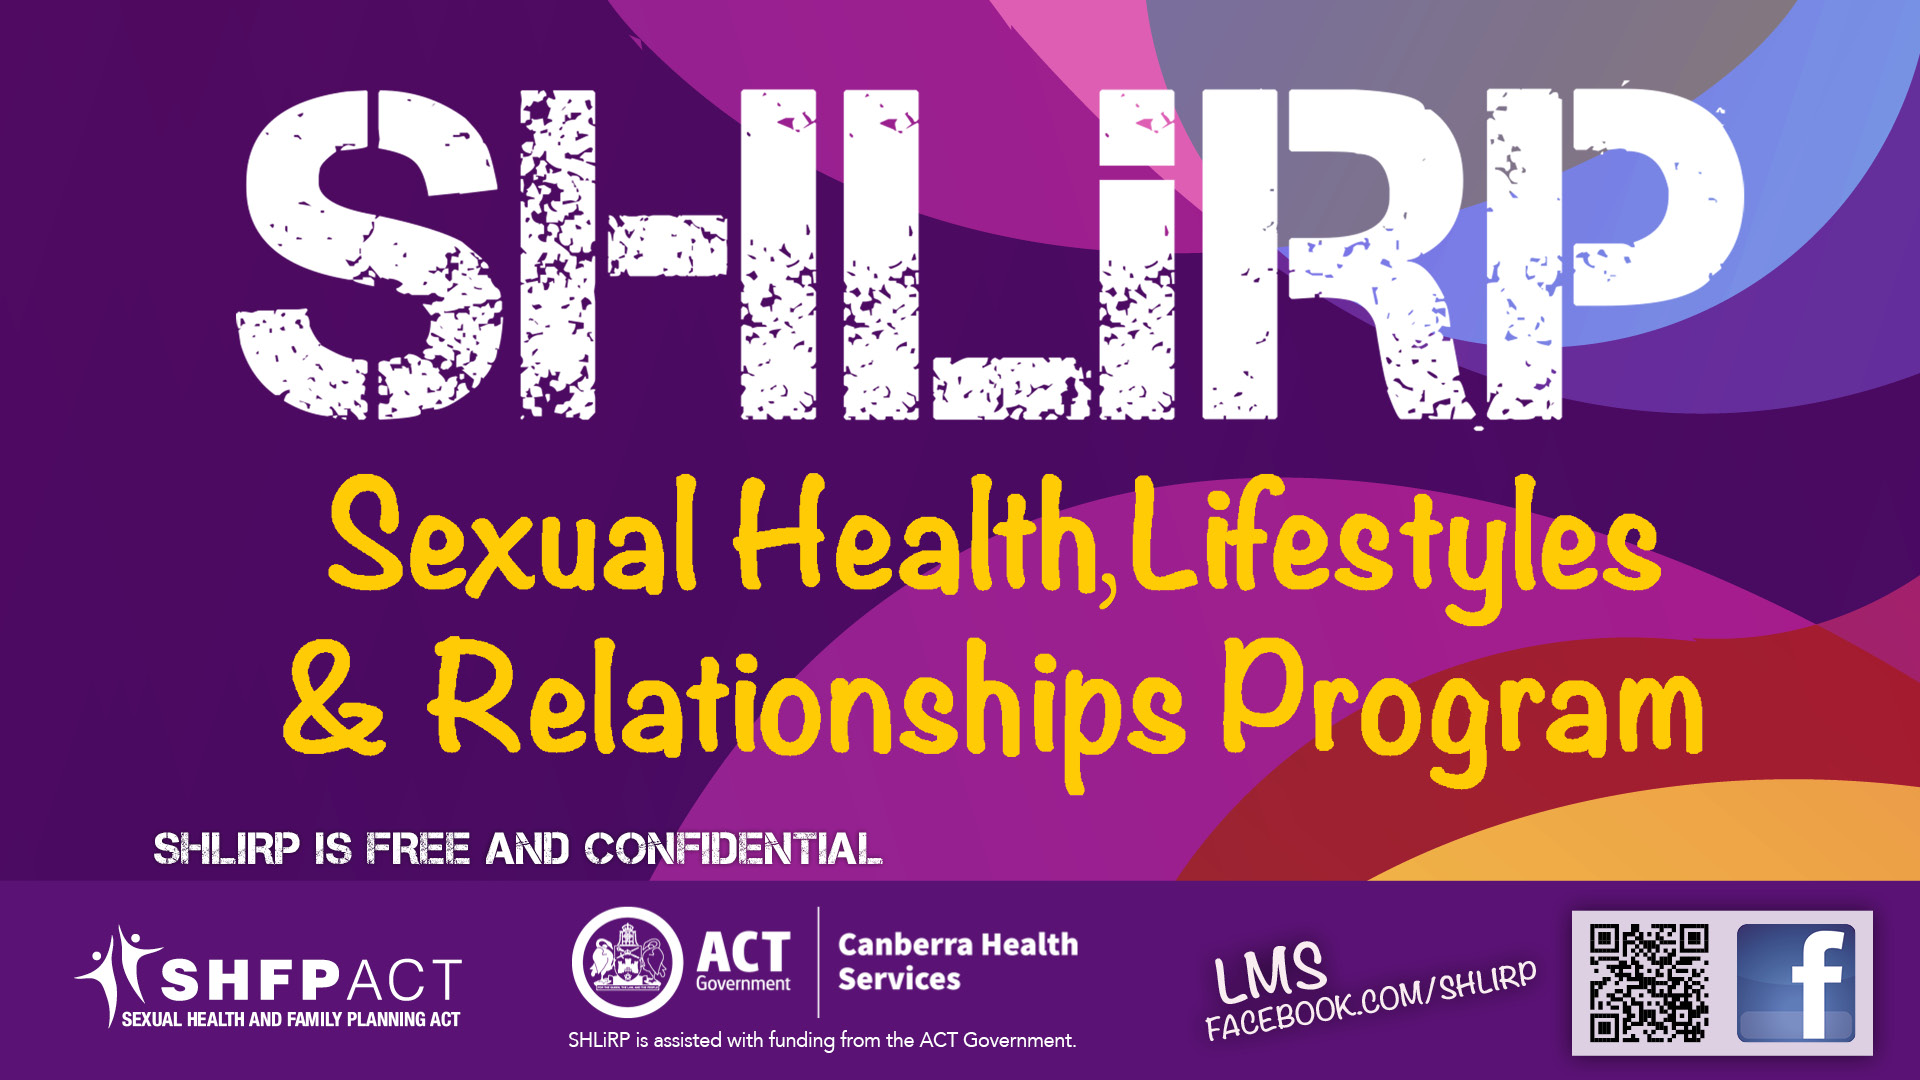 tex based imaged that's says 'SHLiRP Sexual Health, Lifestyle and Relationships Program'